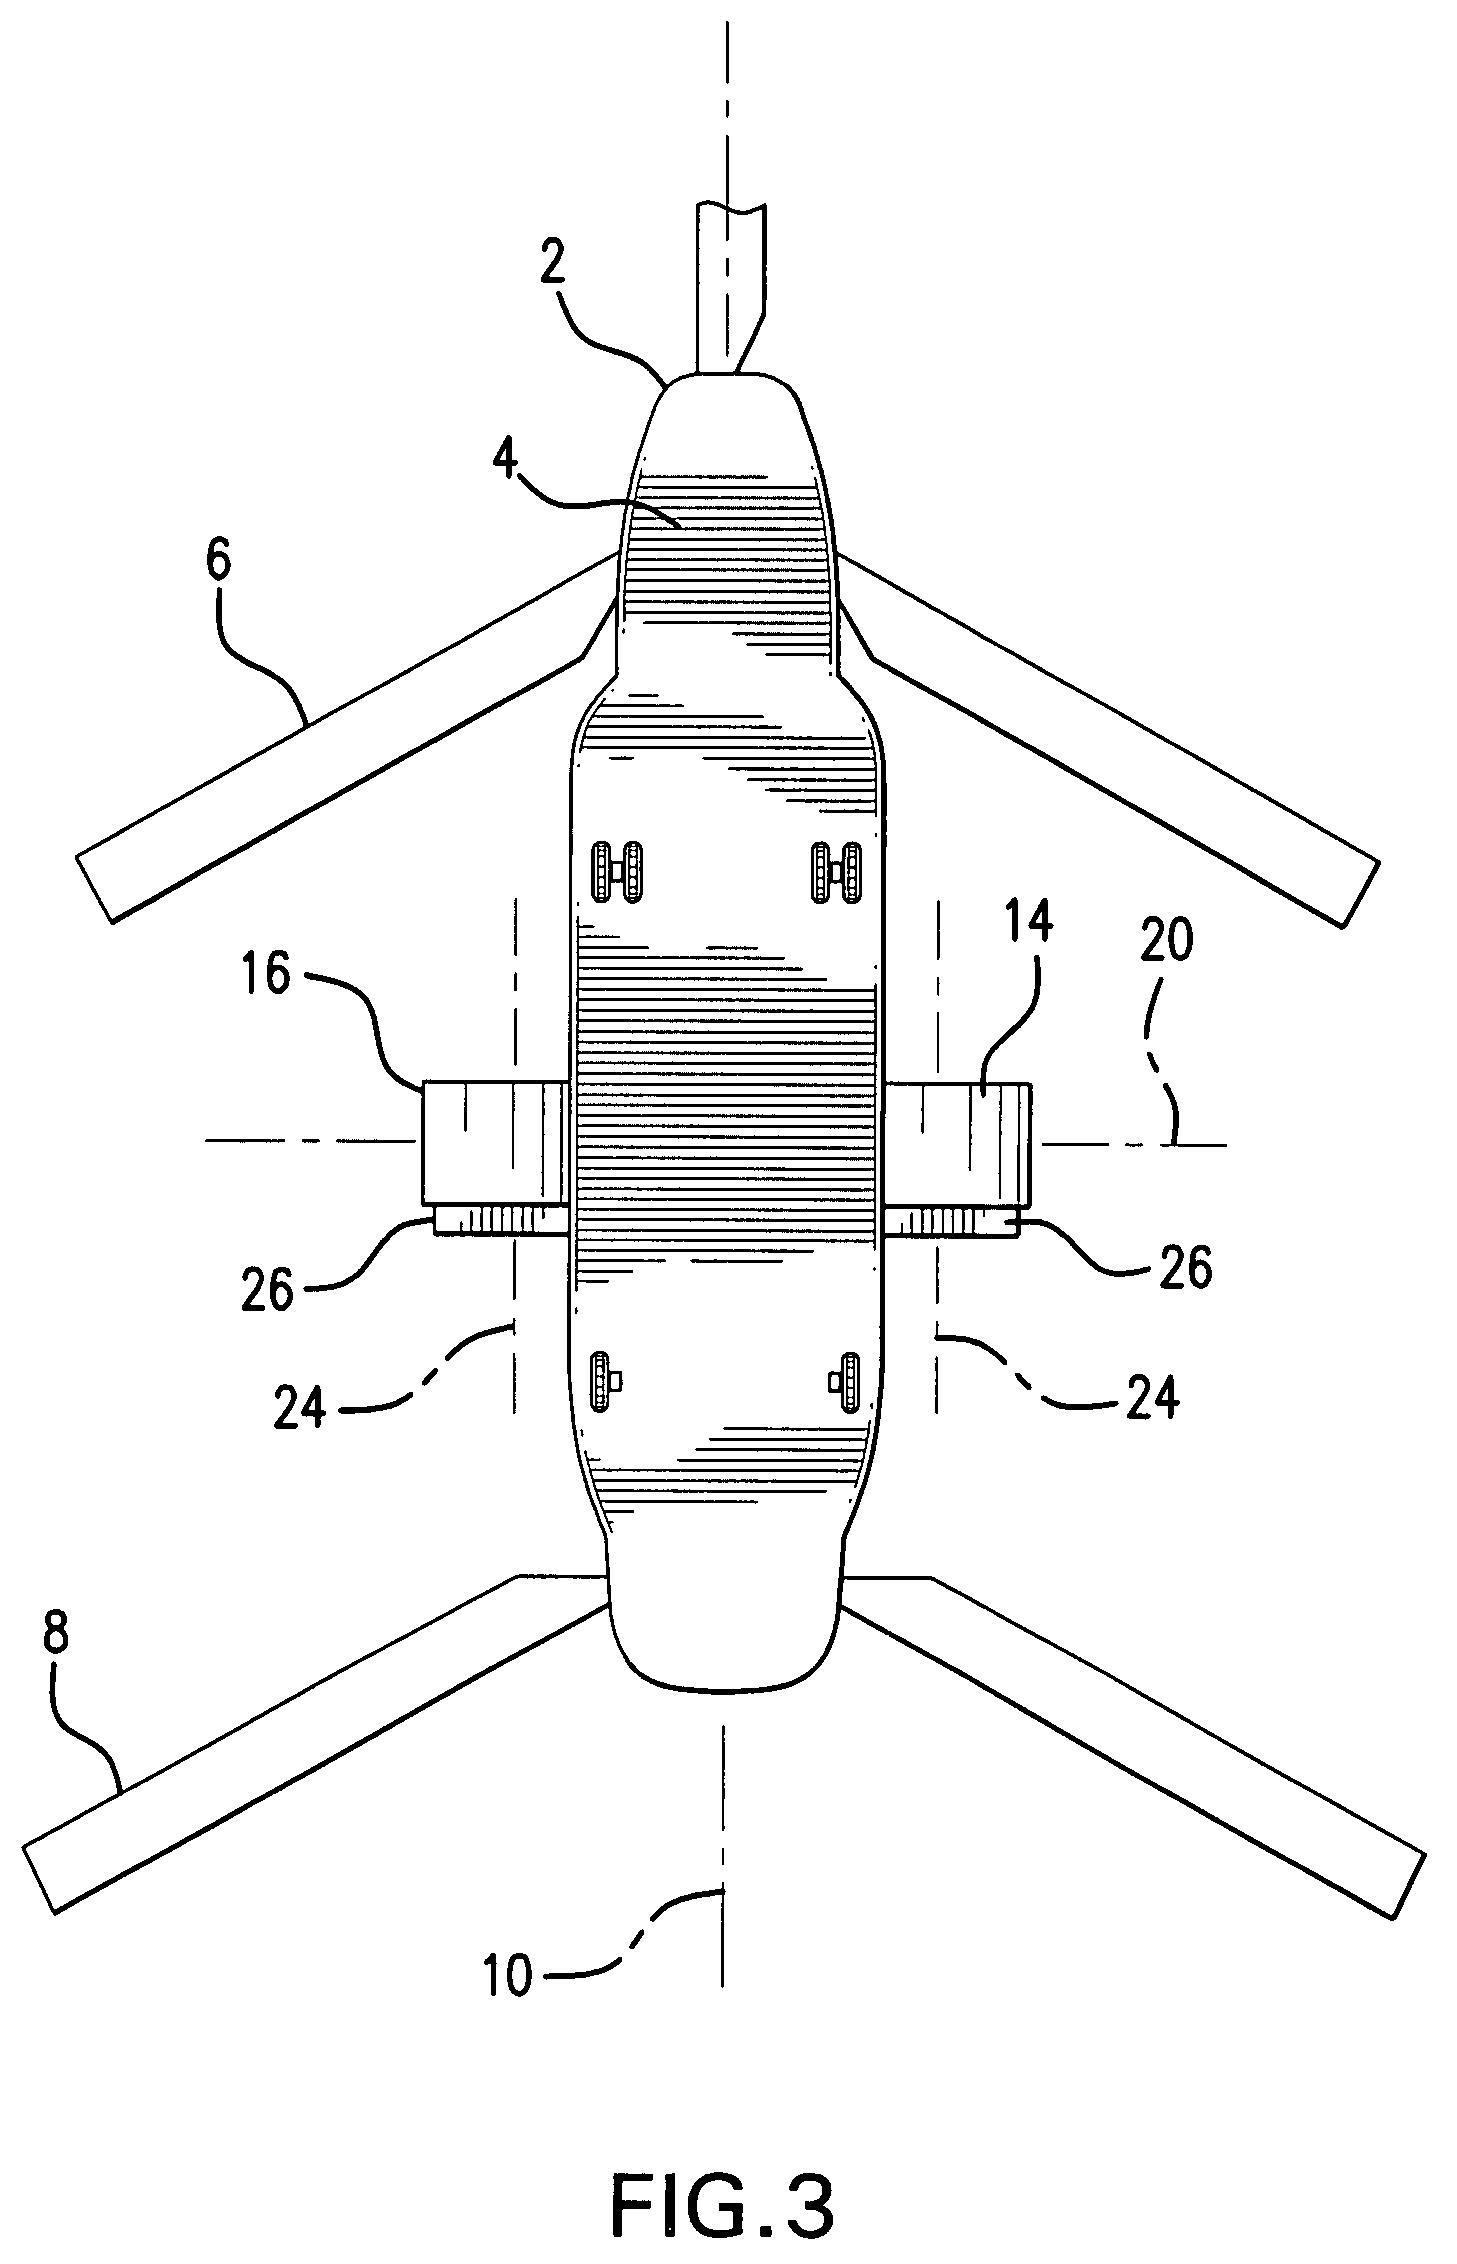 Vectored thruster augmented aircraft